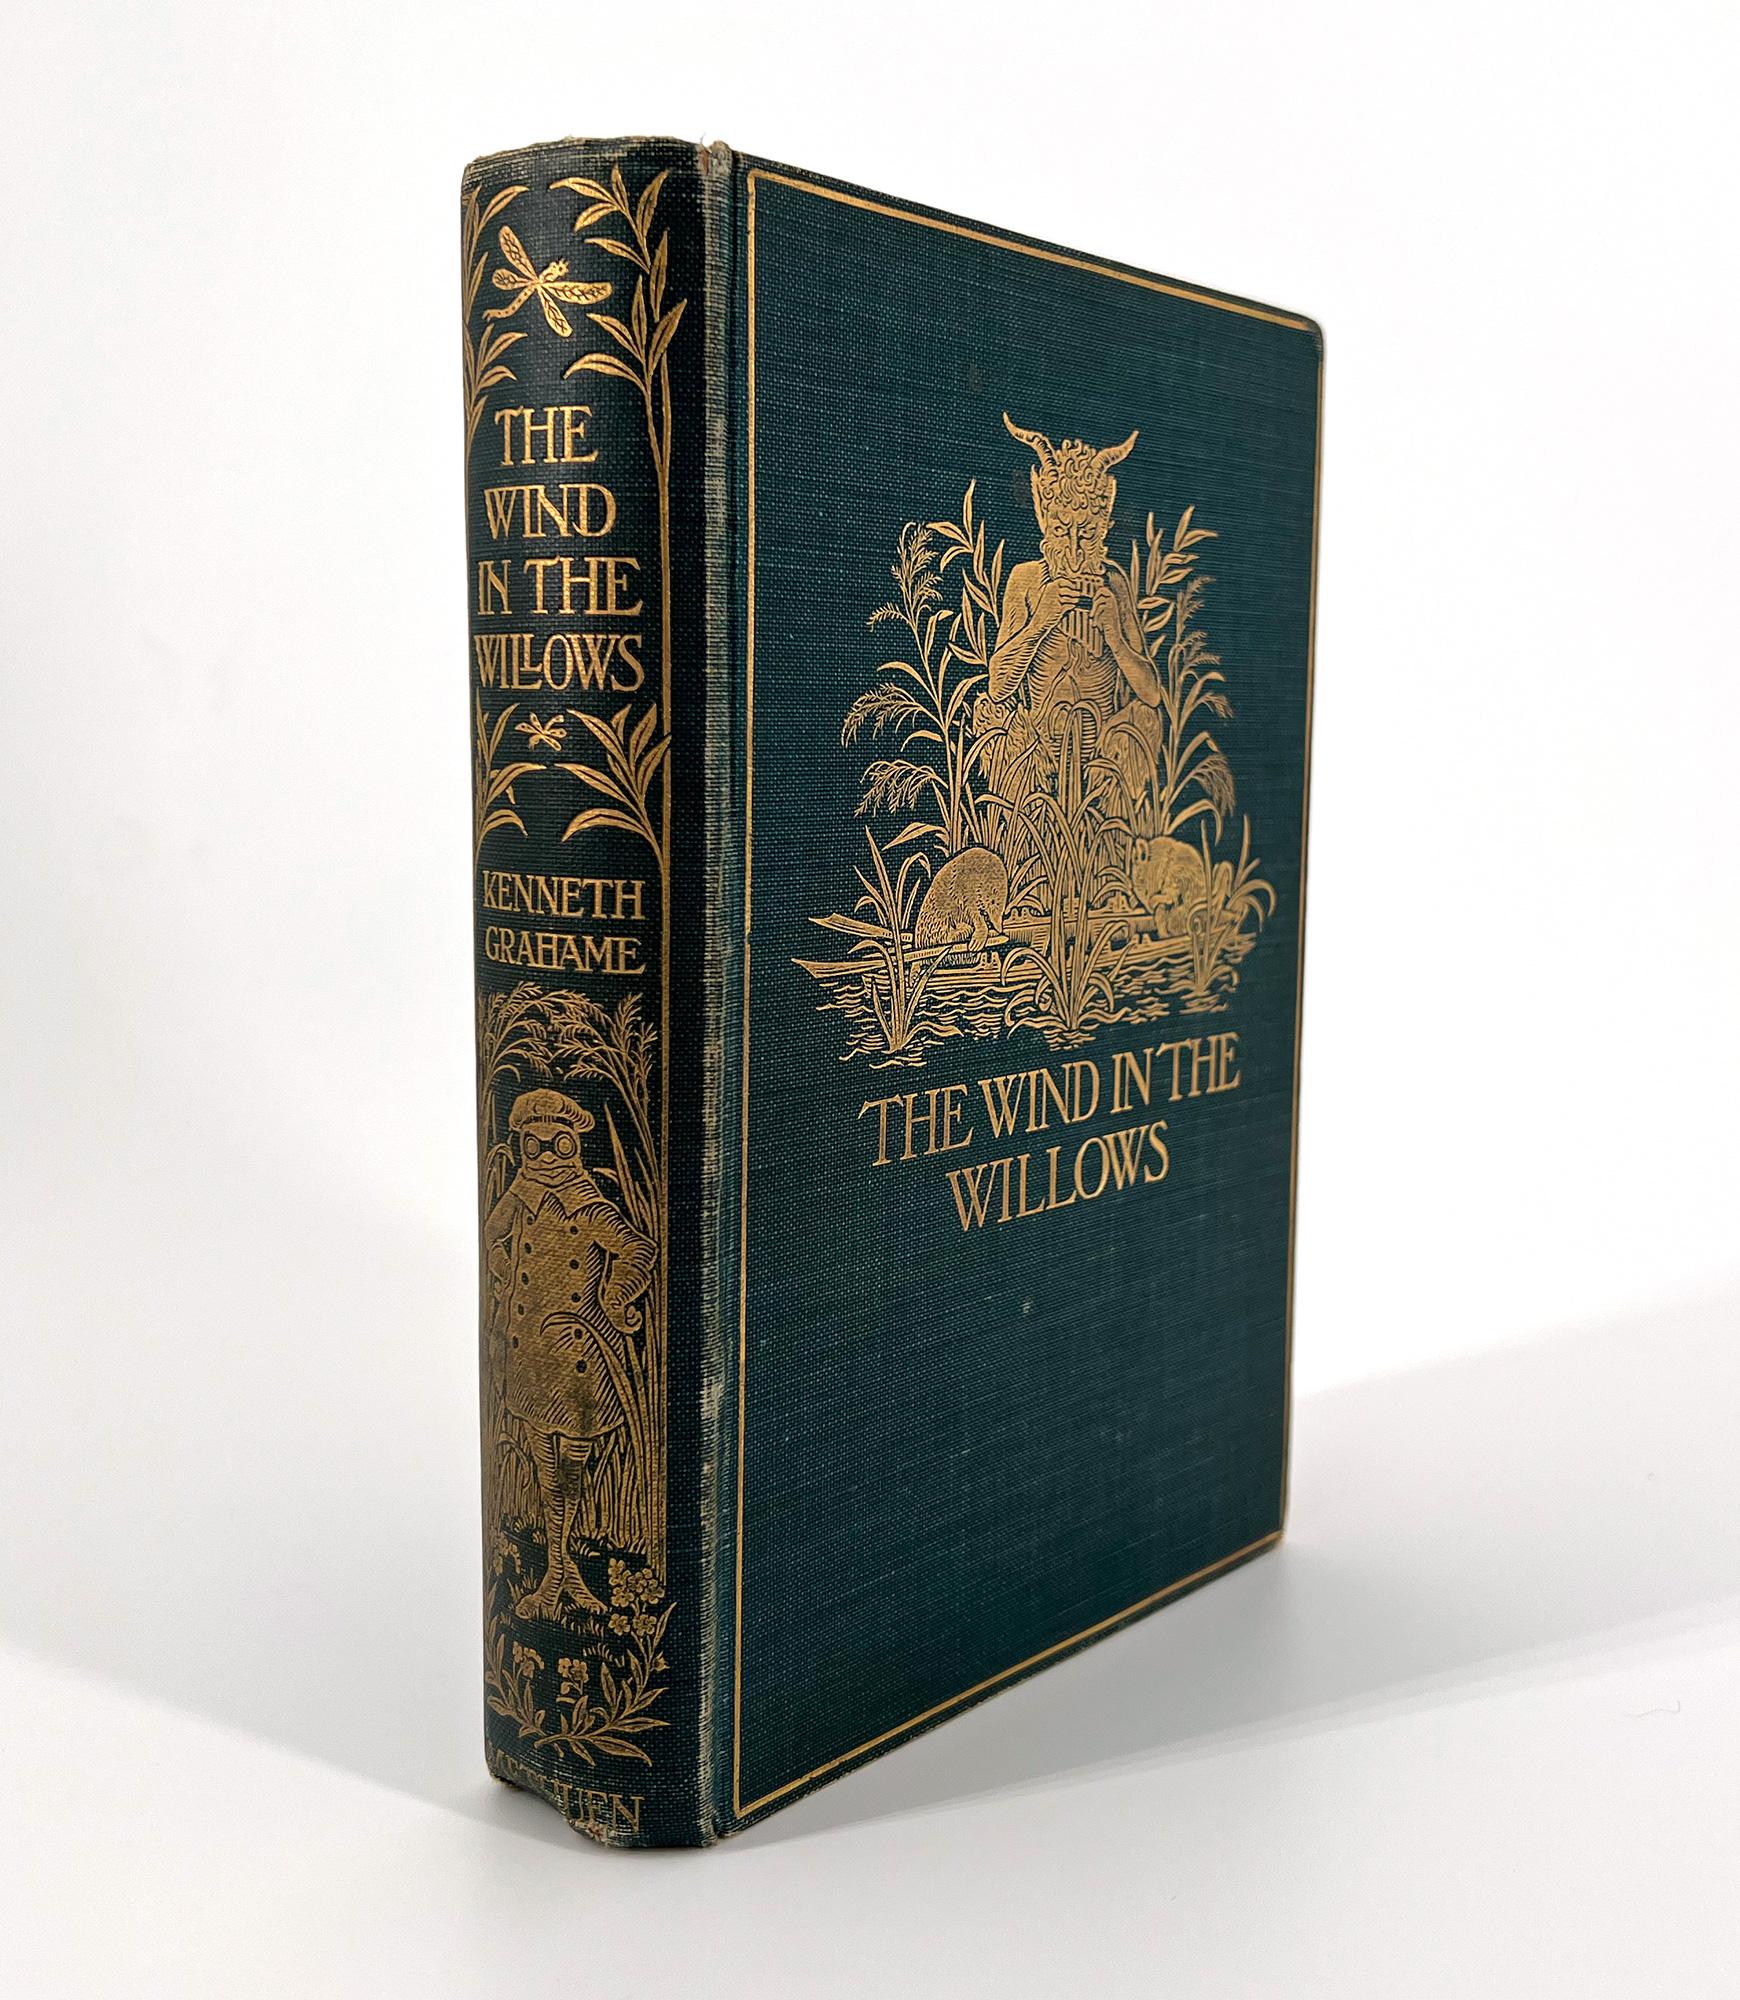 A rare first edition, with near-fine dust jacket of the children's classic.

Grahame, Kenneth. The Wind in the Willows; with a frontispiece by Graham Robertson.
London: Methuen and Co., 1908. First Edition. 
8vo. 7 1/2 x 4 3/4 in. (190 x 120